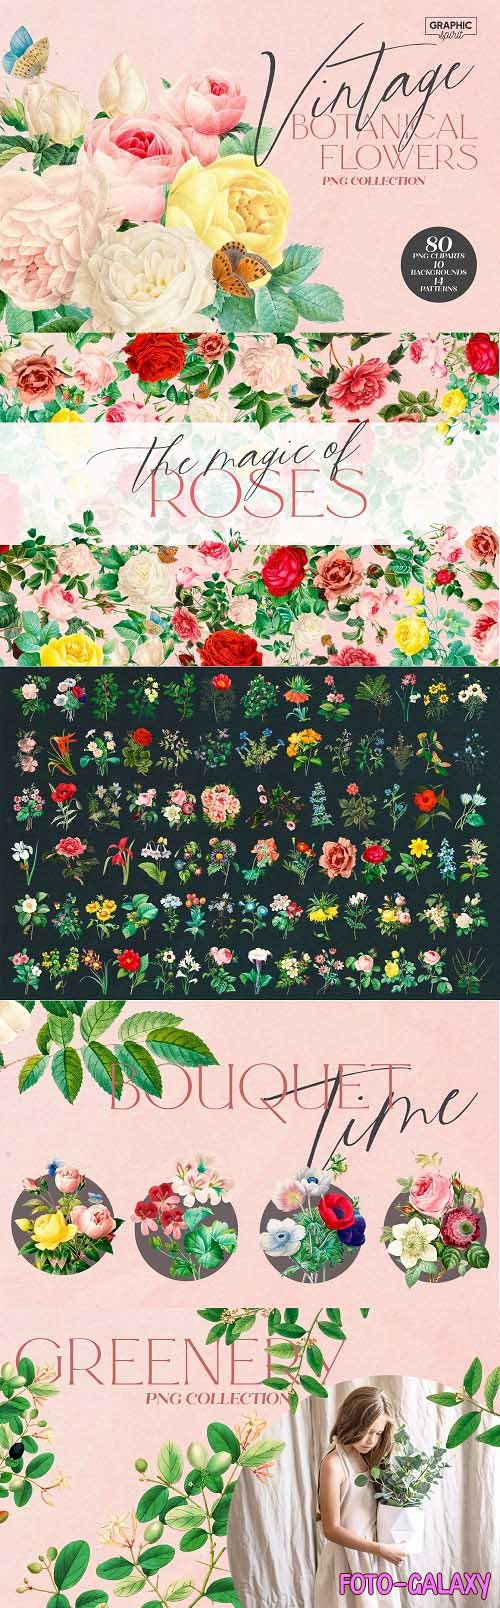 Aesthetic Vintage Flower PNG Clipart - 6221182